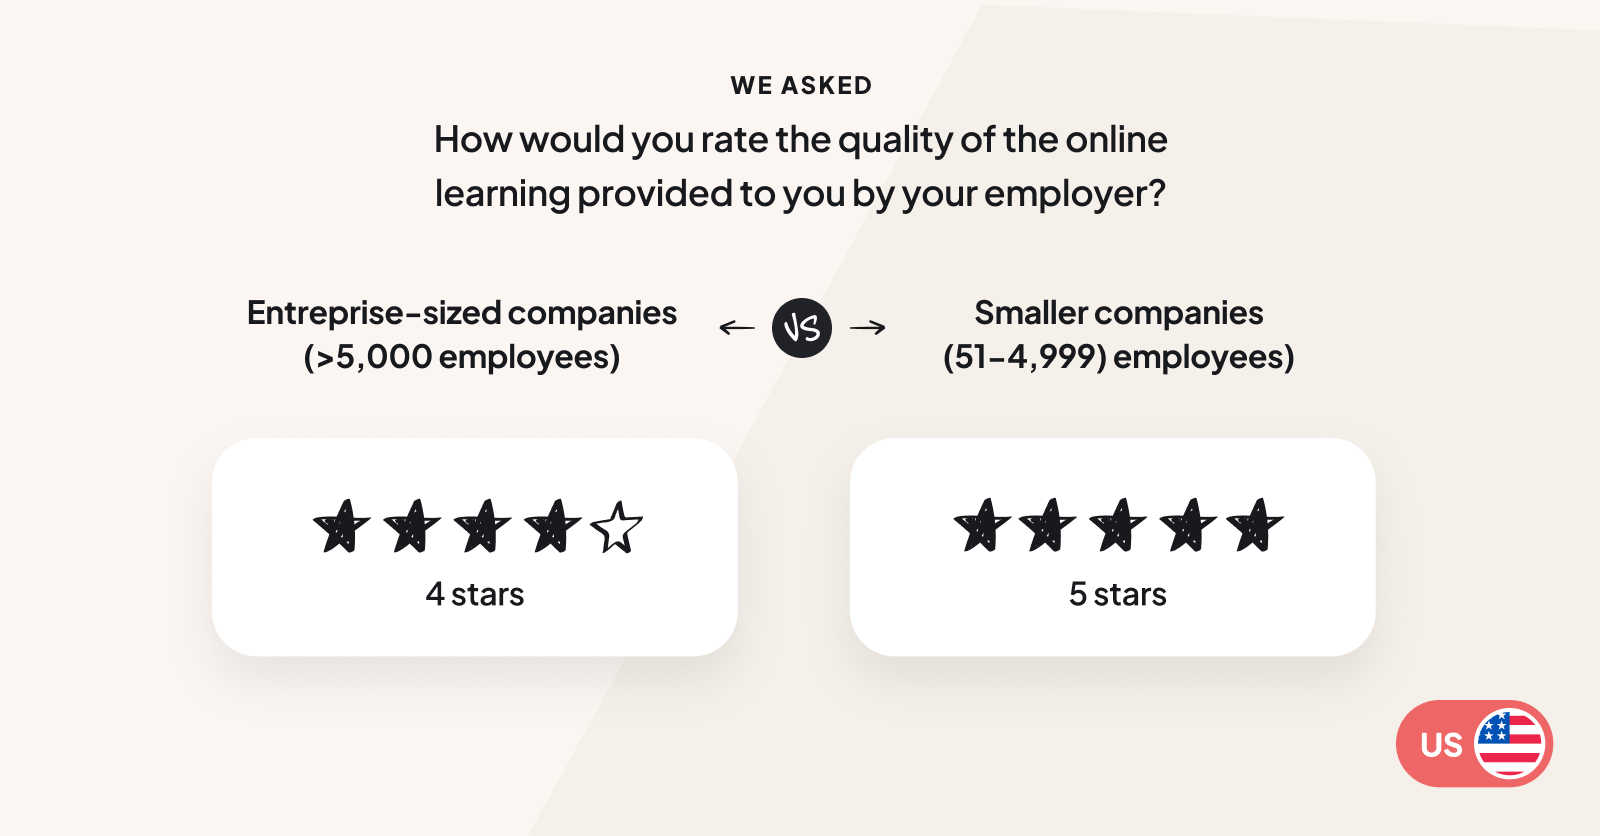 Learners at bigger companies were more likely to give online learning a 4 star rating